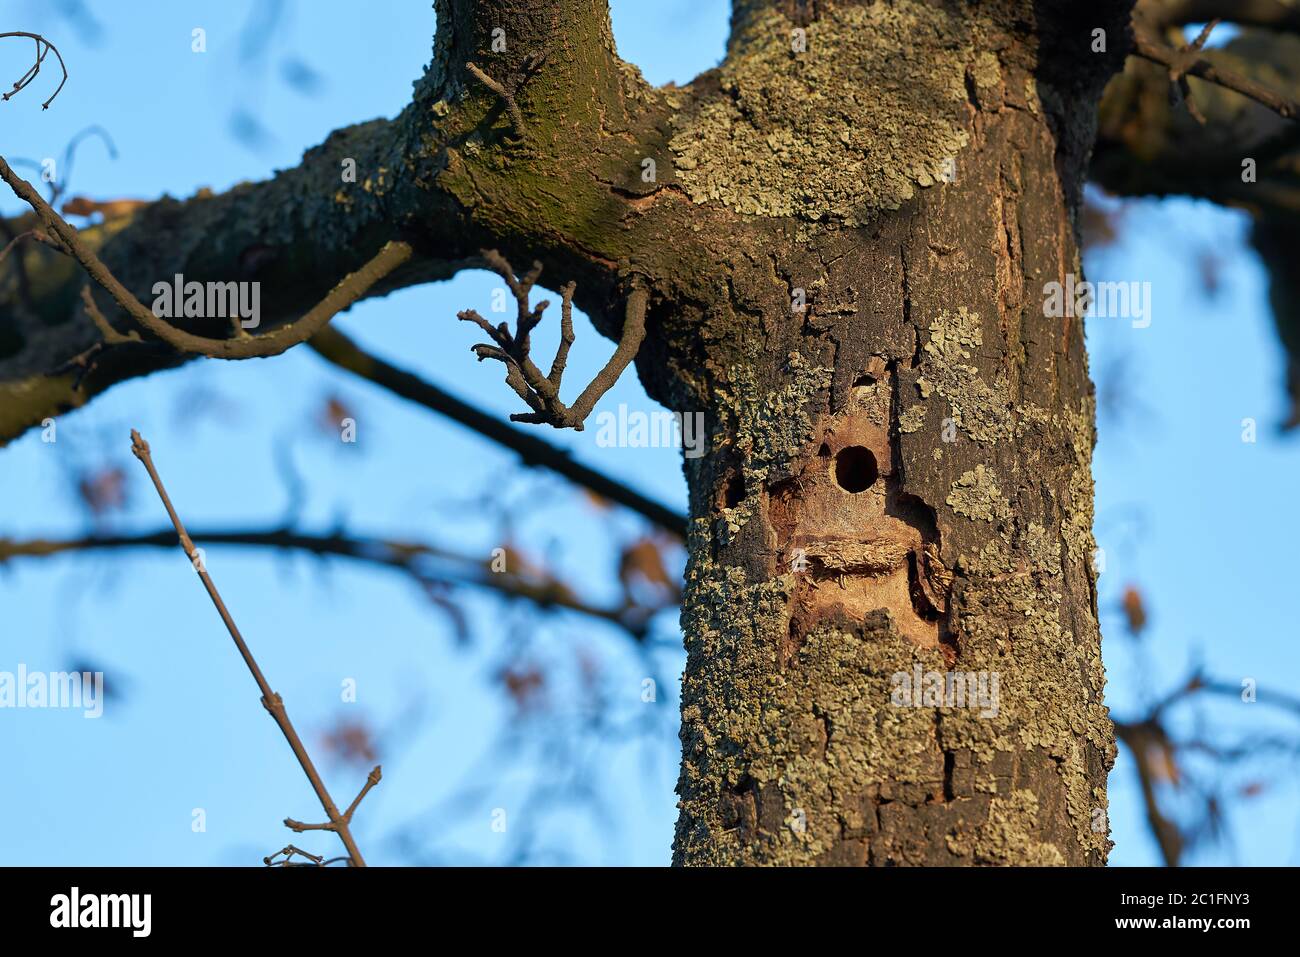 A tree infested by the Asian longhorn beetle in Magdeburg in Germany. The beetle is spreading around since 2000 in Europe, and damaged deciduous trees. Stock Photo